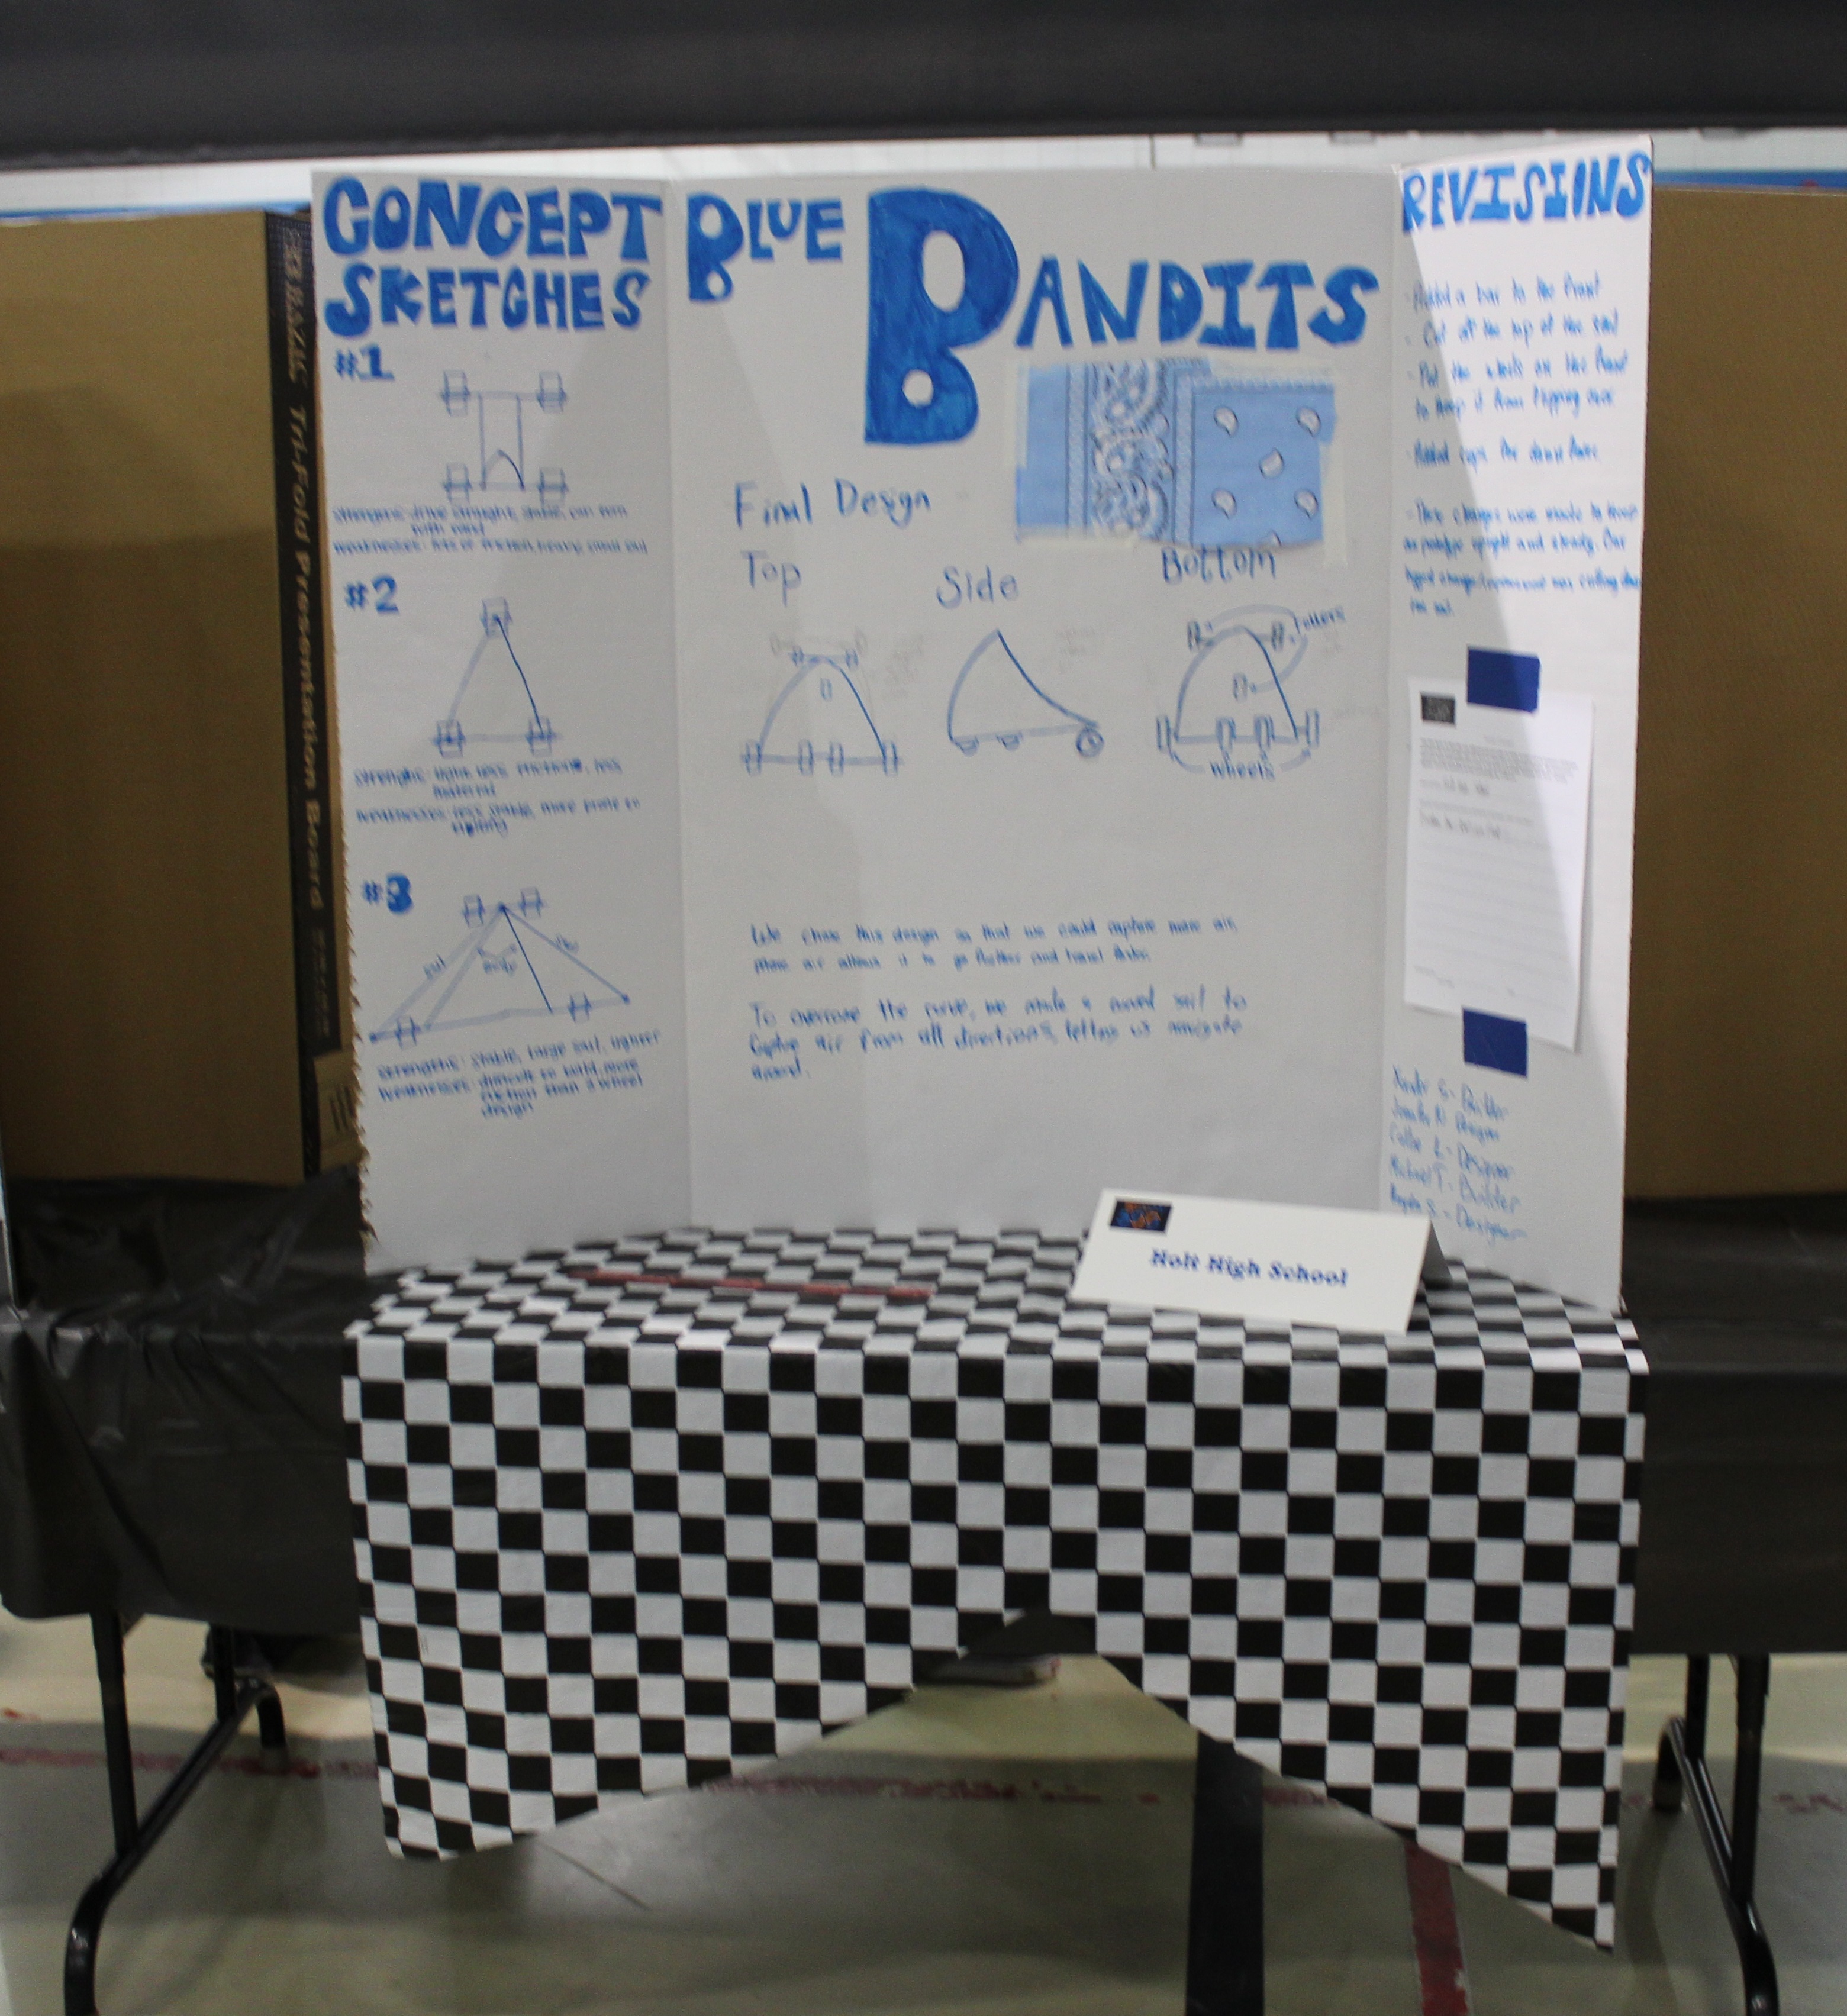 Bandits entry in PLTW competition